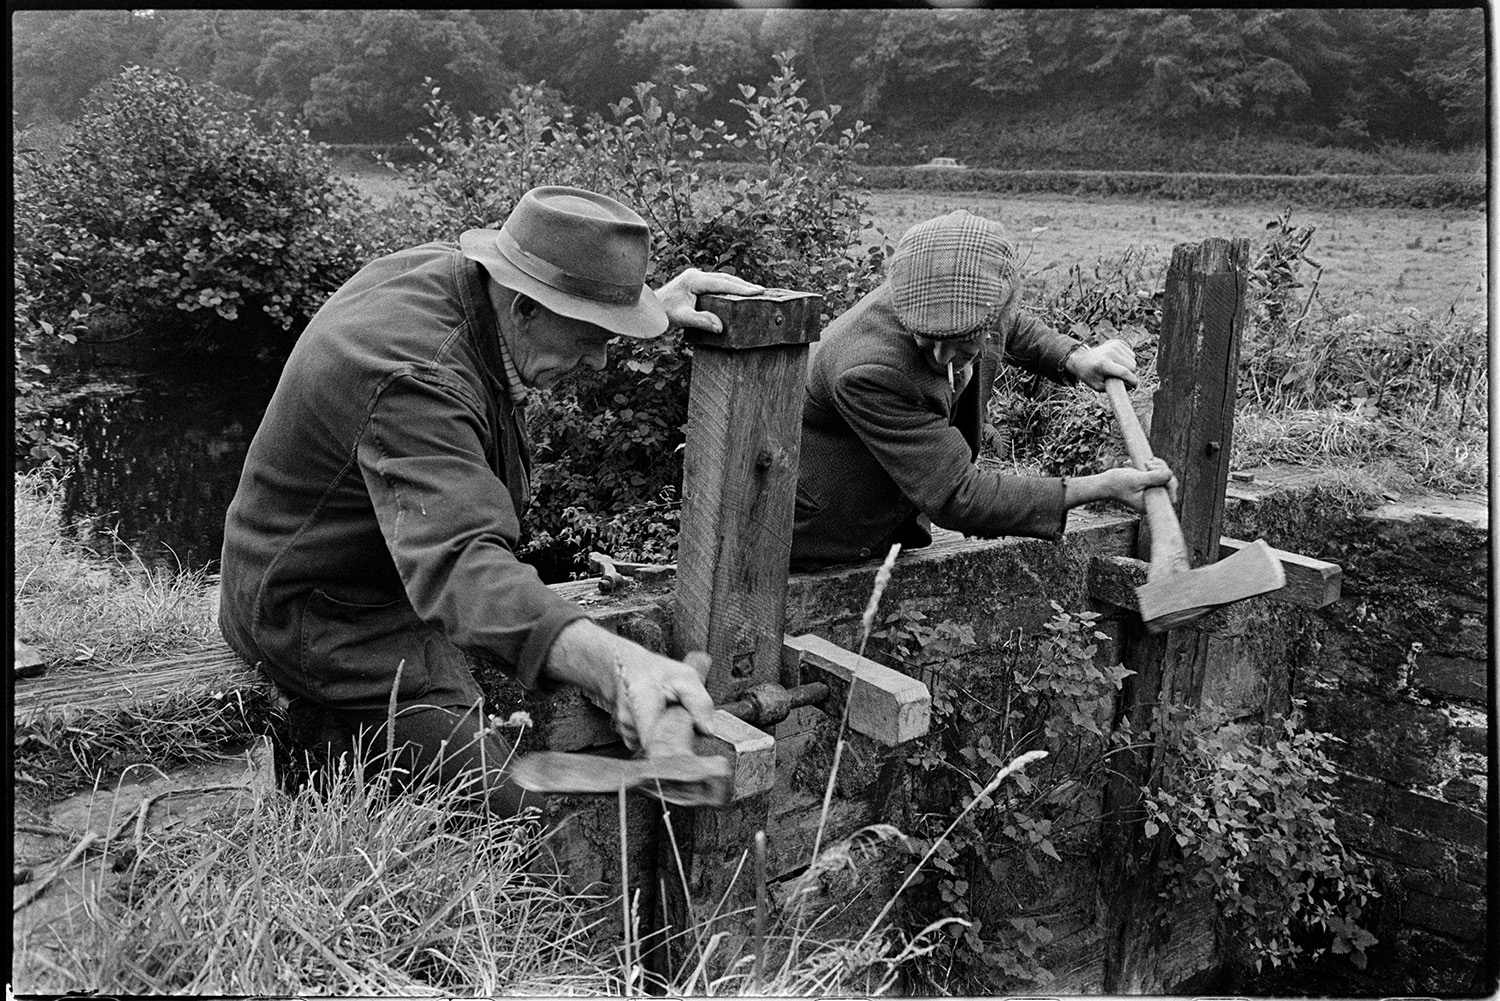 Men repairing sluice gate of mill leat. 
[Two men repairing a wooden sluice gate of the leat running to Head Mill, Kings Nympton. They are using axes.]